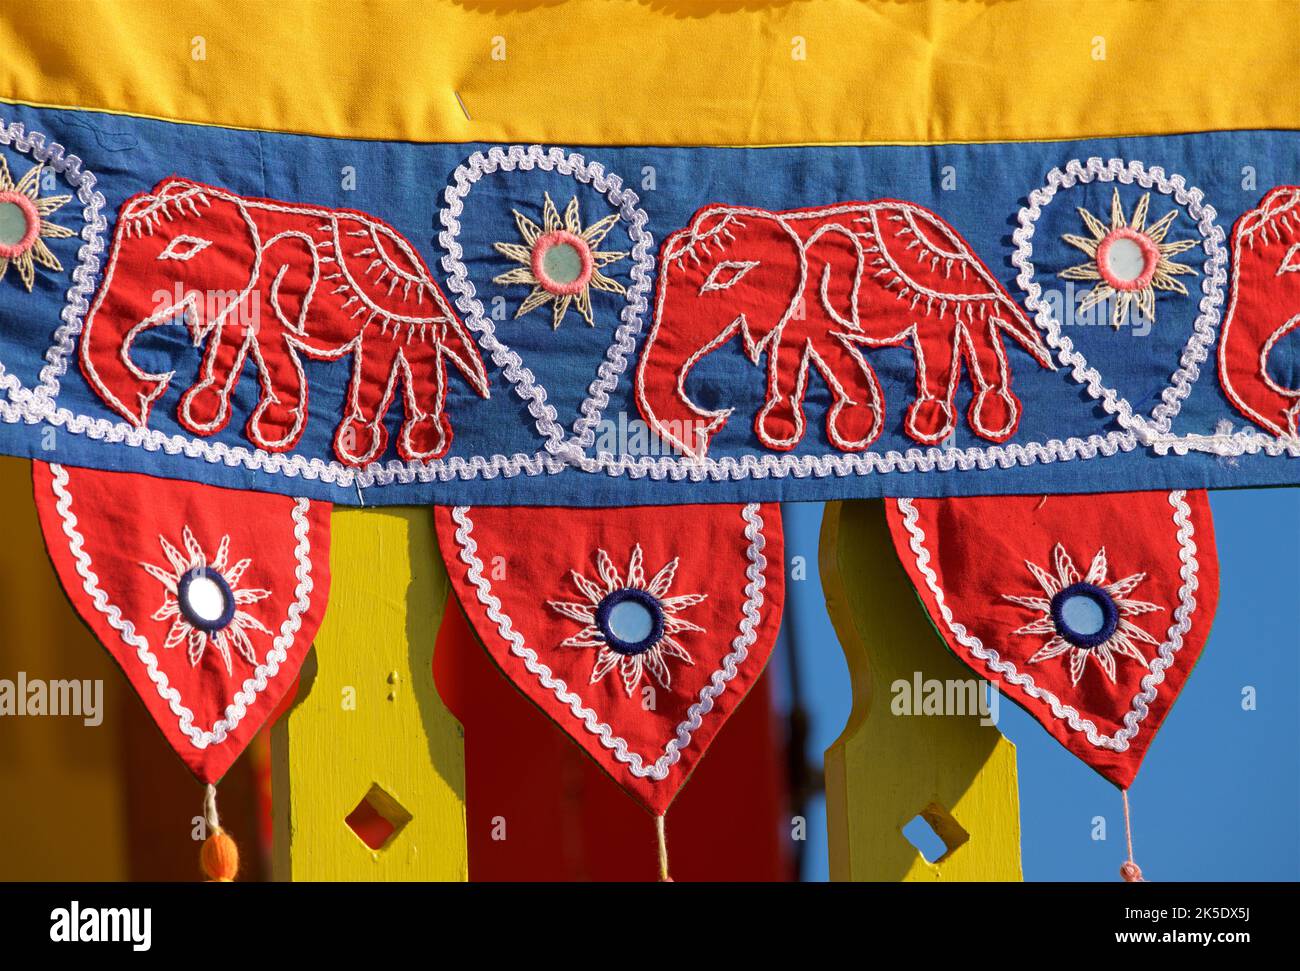 Detail of fabric adornment with elephant designs on the Hare Krishna processional juggernaut, Brighton & Hove, England. The annual Rathayatra Festival for Lord Krishna and his devotees promenades along Hove esplanade each year. Krishna in his form of Jagannatha is pulled along on a large wooden juggernaut. Stock Photo